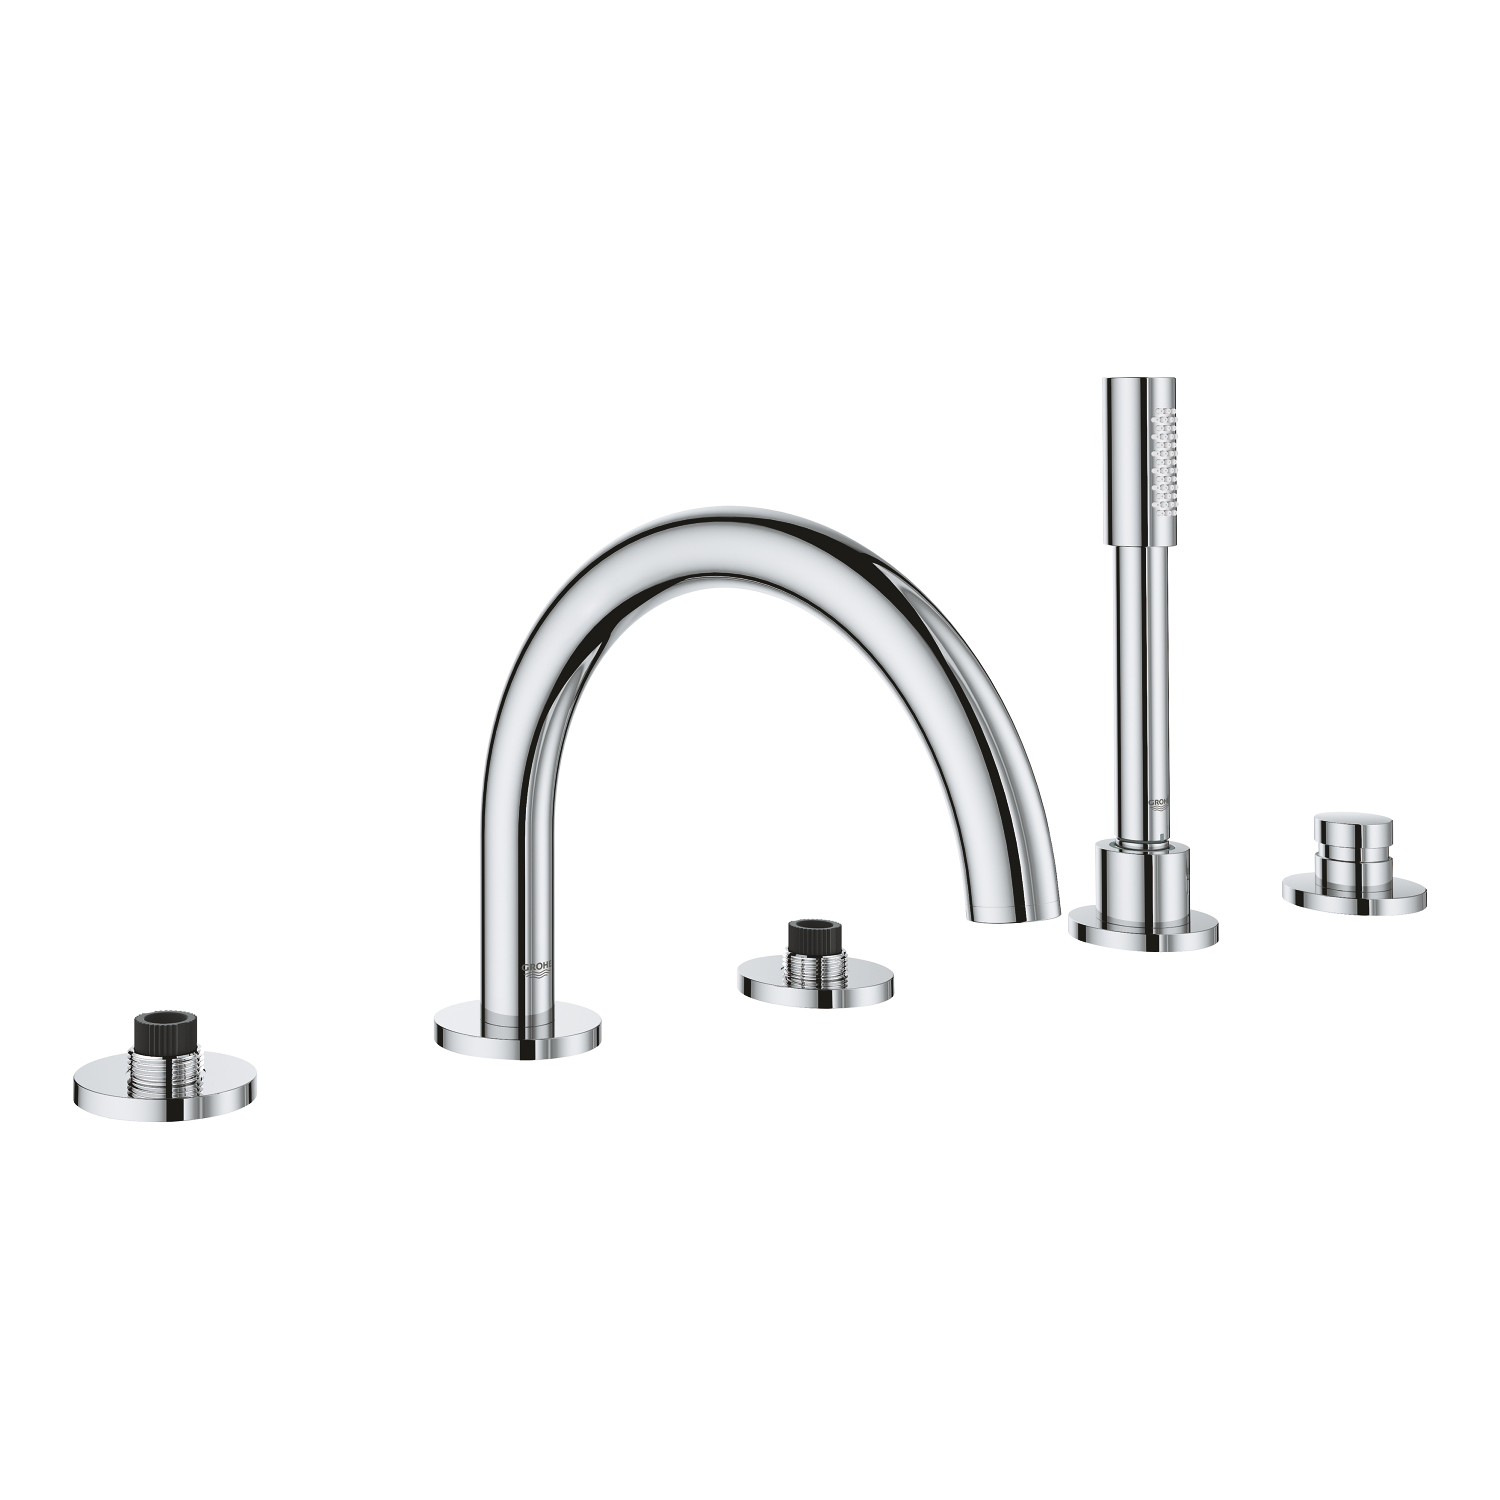 Atrio Deck Mounted Tub Faucet Plus Hand Shower In StarLight Chrome